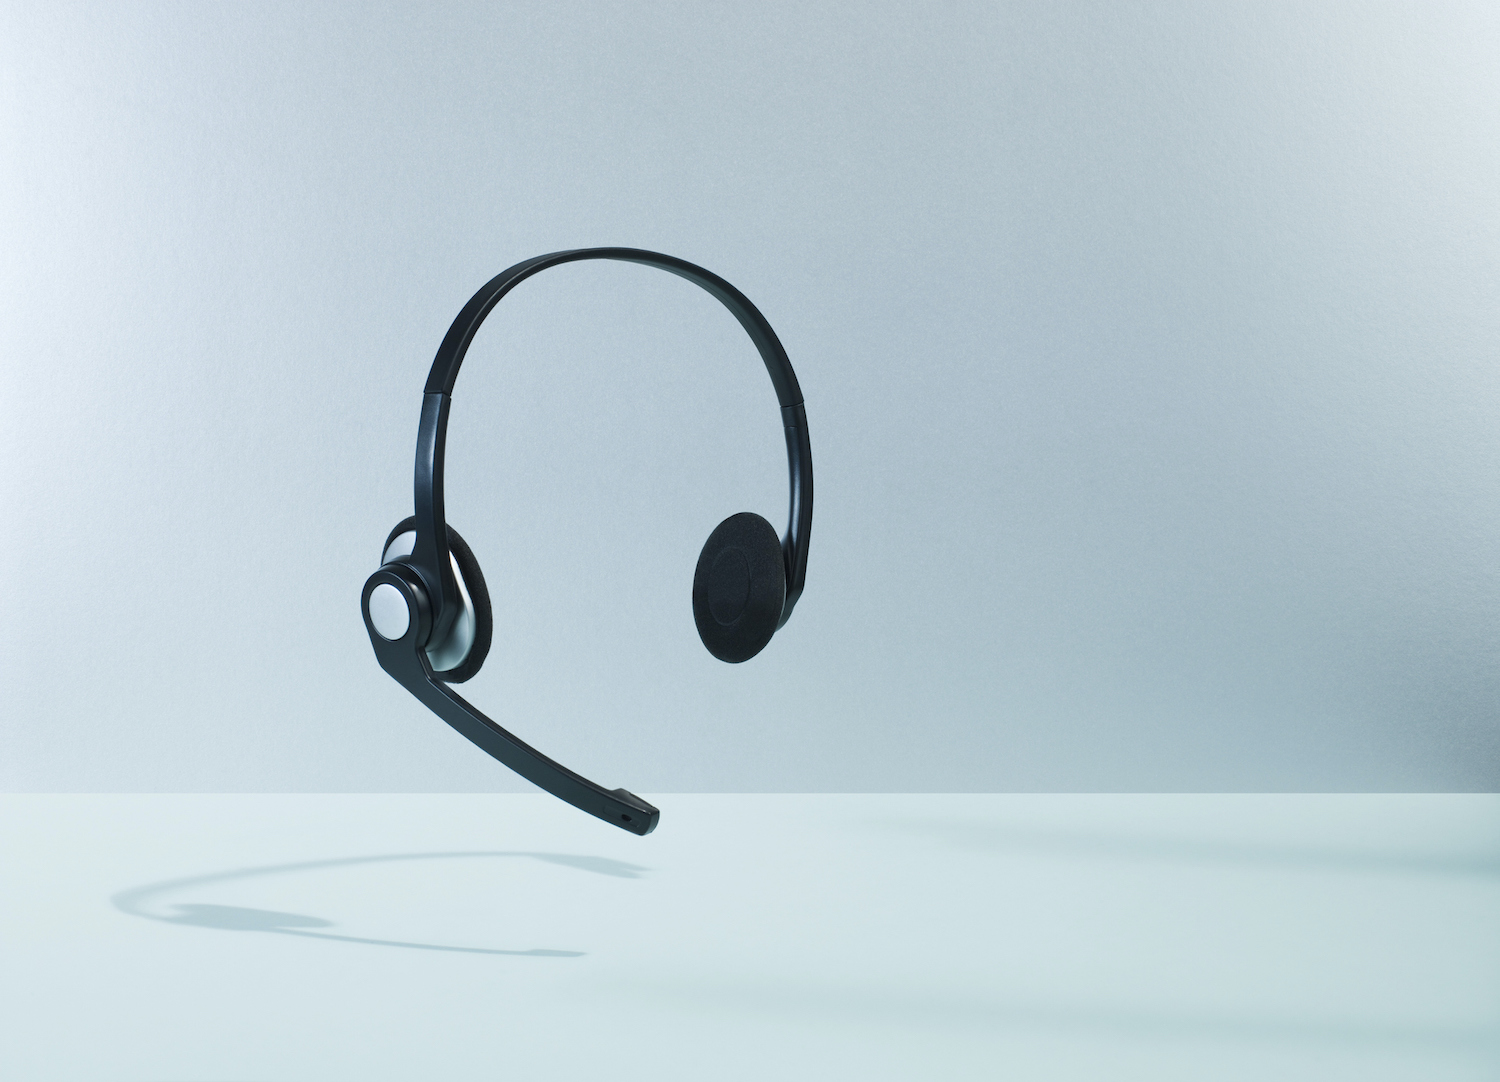 floating headset with dropshadow